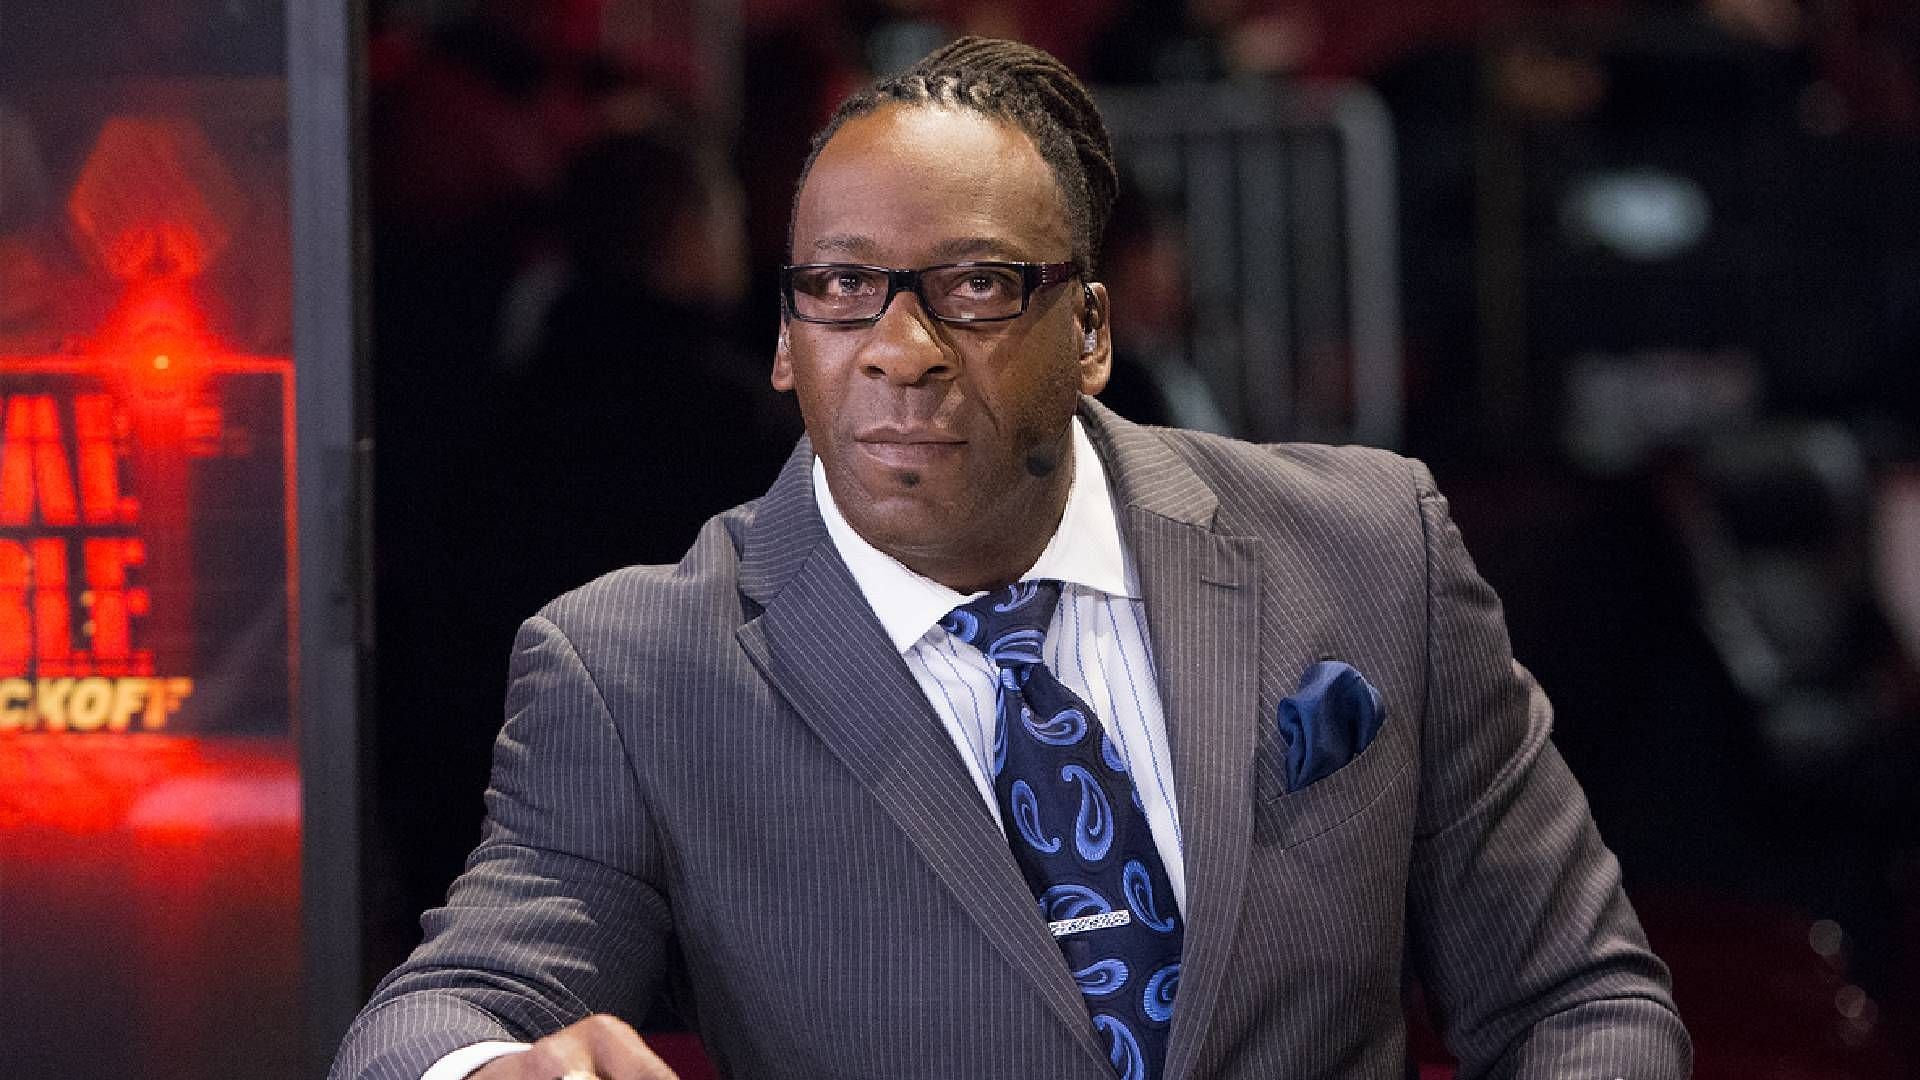 Booker T unimpressed by high championship match throughout WrestleMania weekend